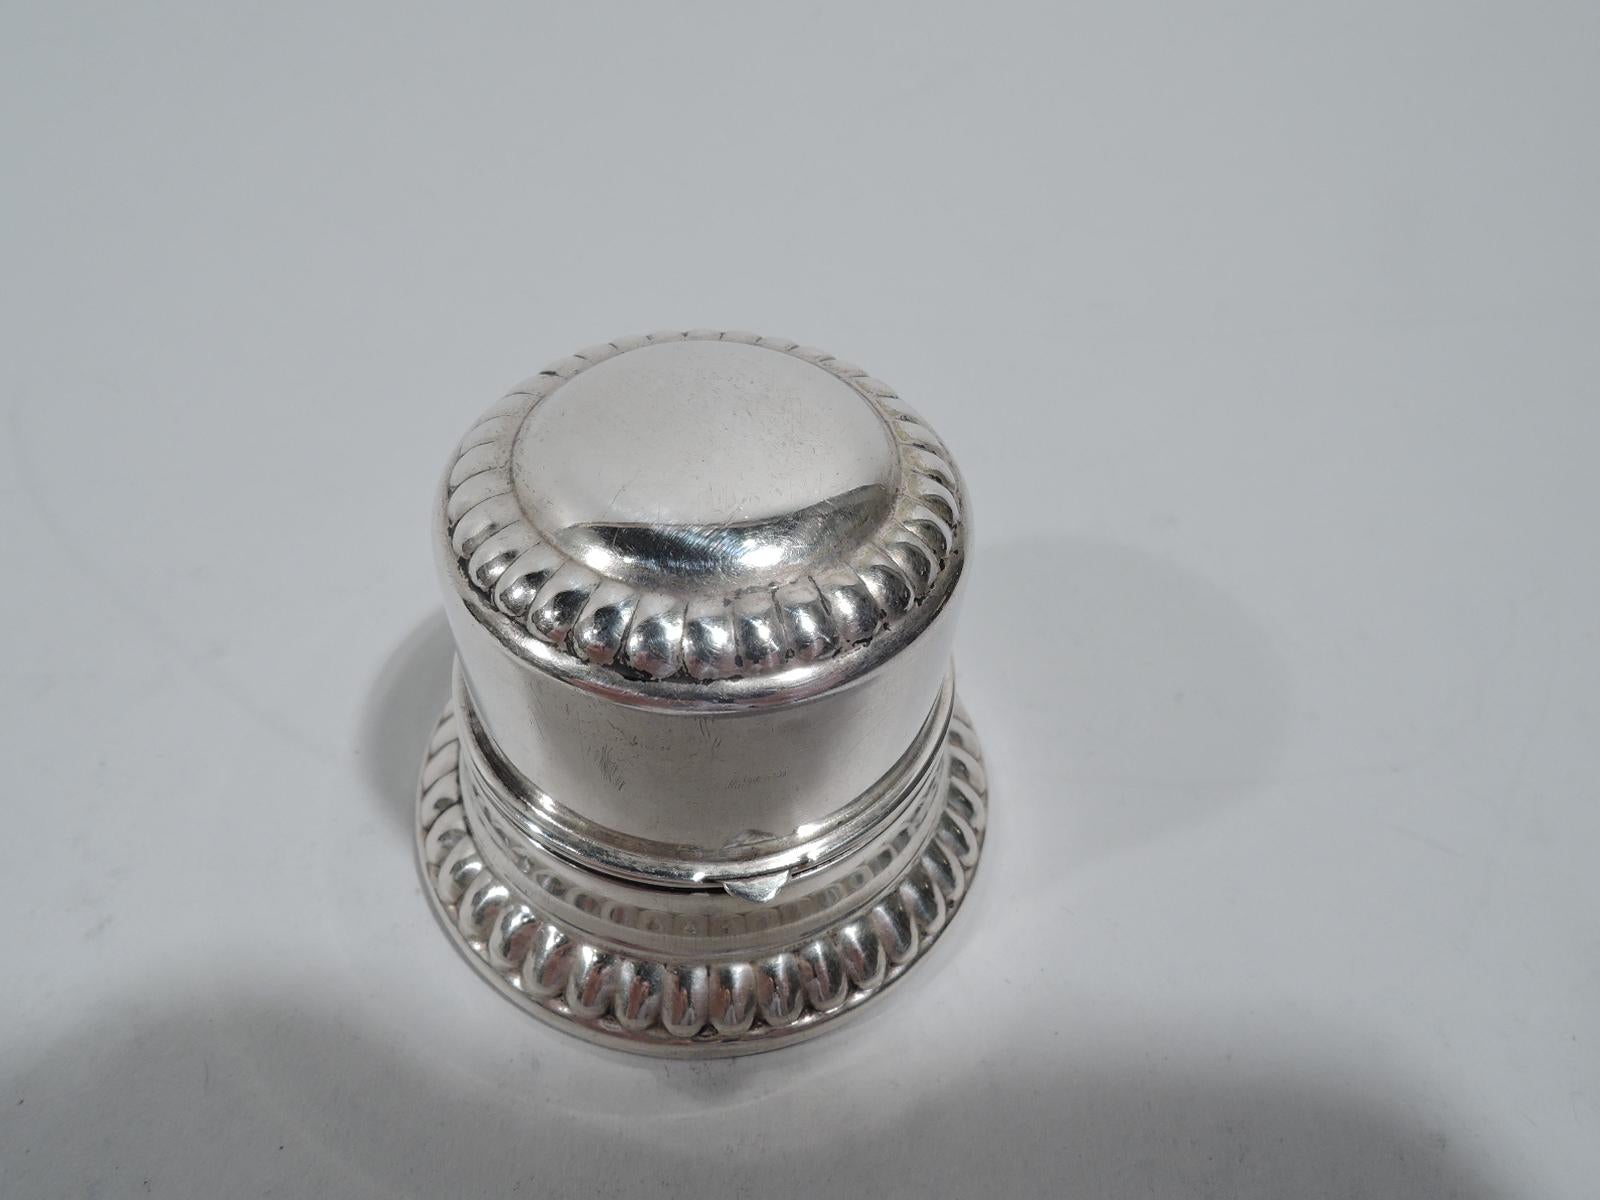 Classical sterling silver ring box. Made by Birks in Canada. Round with straight sides and hinged cover. Cover top has vacant center and gadrooned rim. Spread foot also gadrooned. Box interior has fitted velvet for a single ring. Cover interior gilt